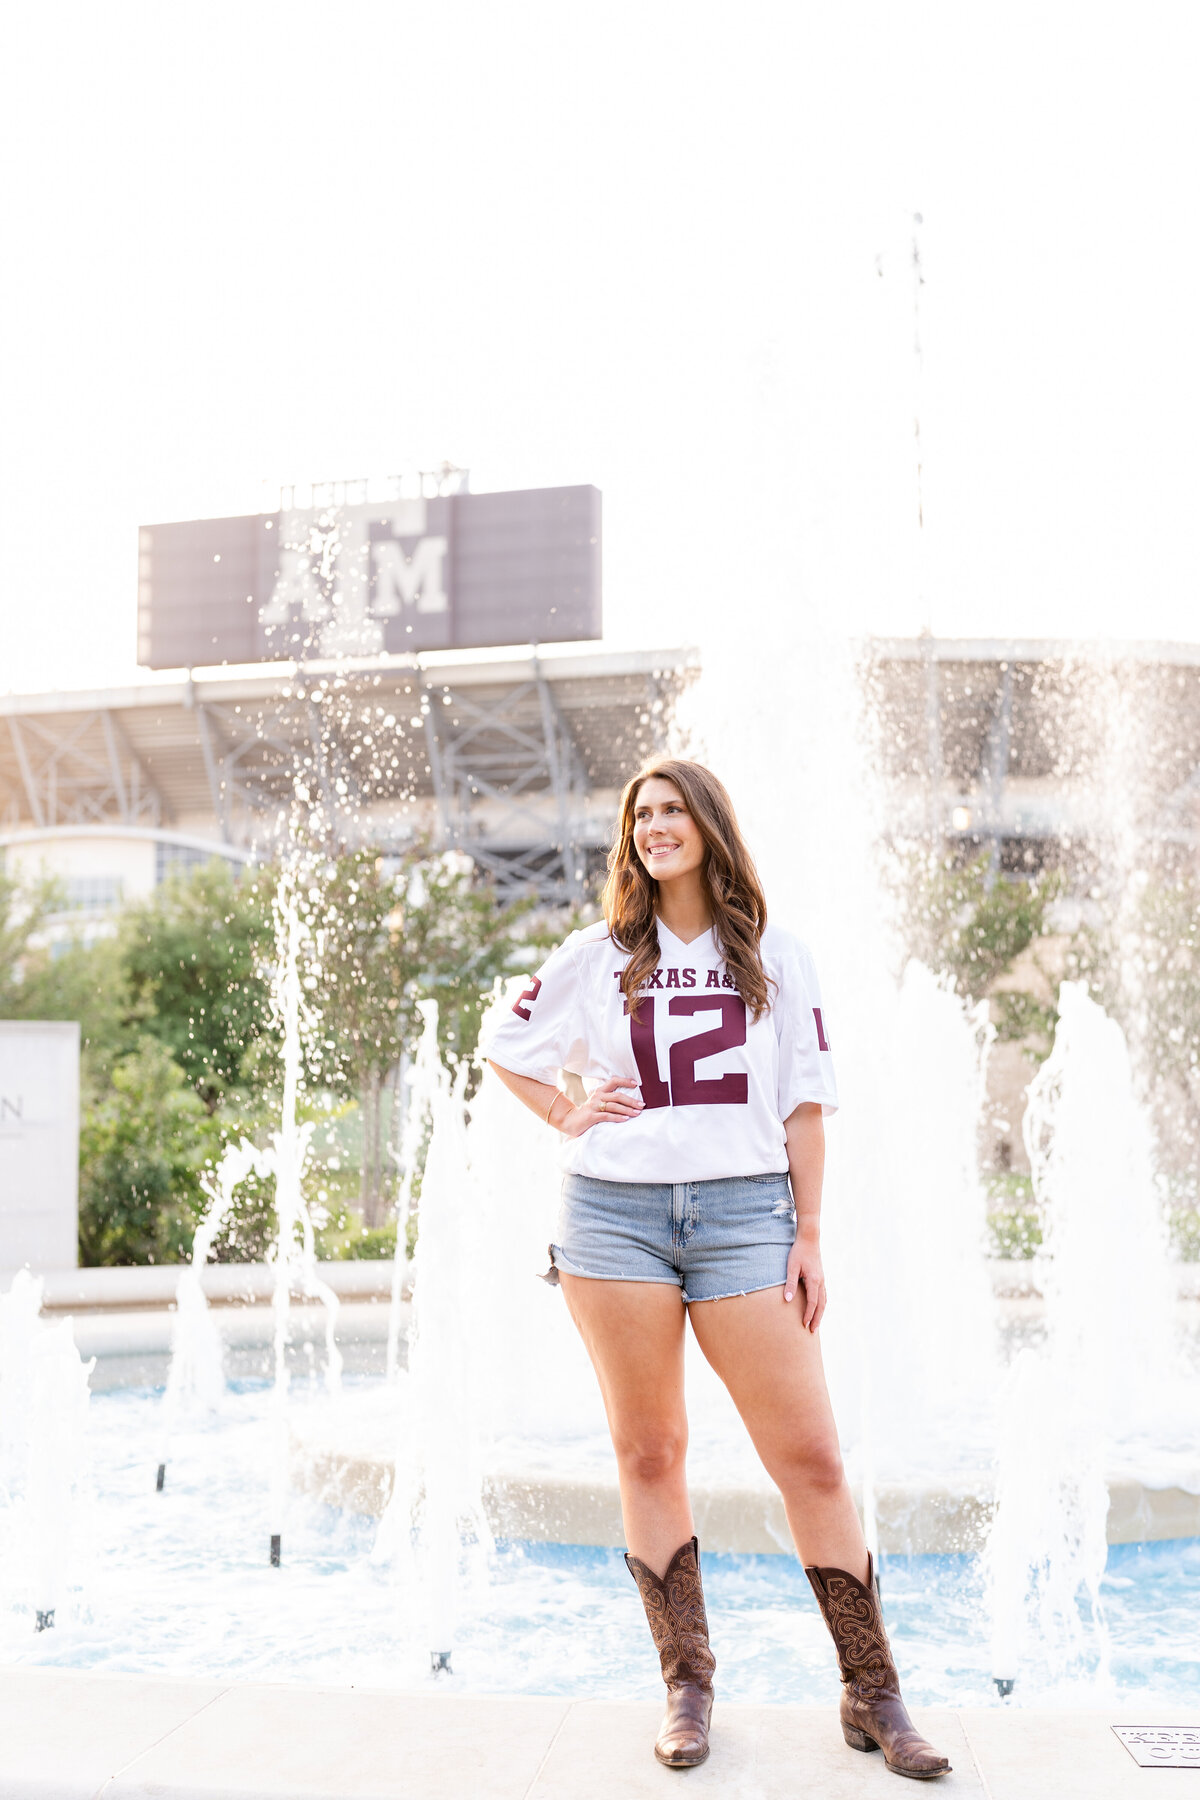 Texas A&M senior girl standing on ledge of fountain with hand on hip and wearing white Aggie jersey and cowboy boots with Kyle Field in background